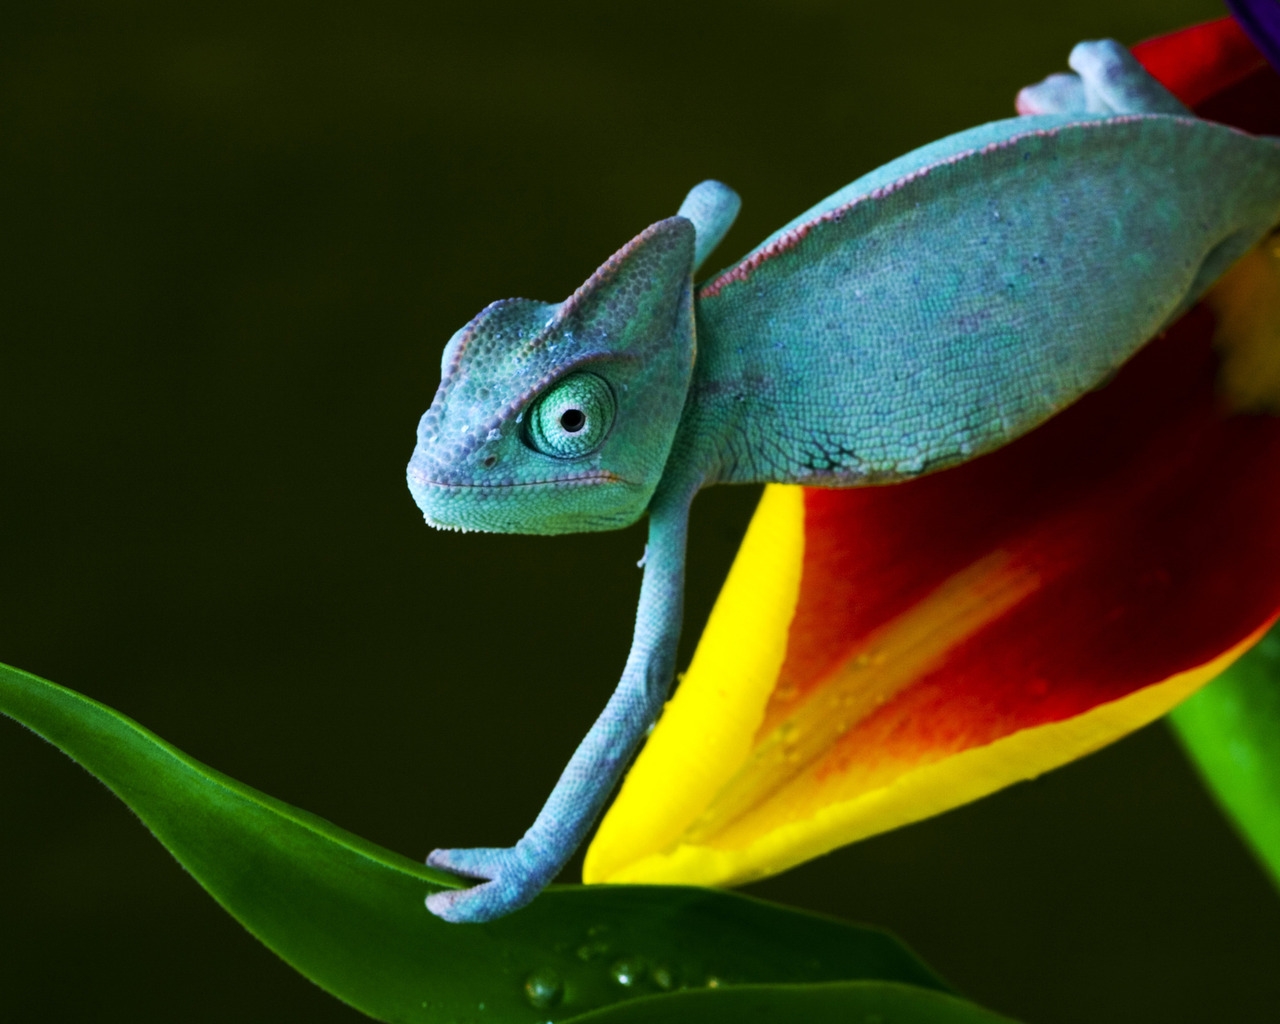 Baby Reptile for 1280 x 1024 resolution